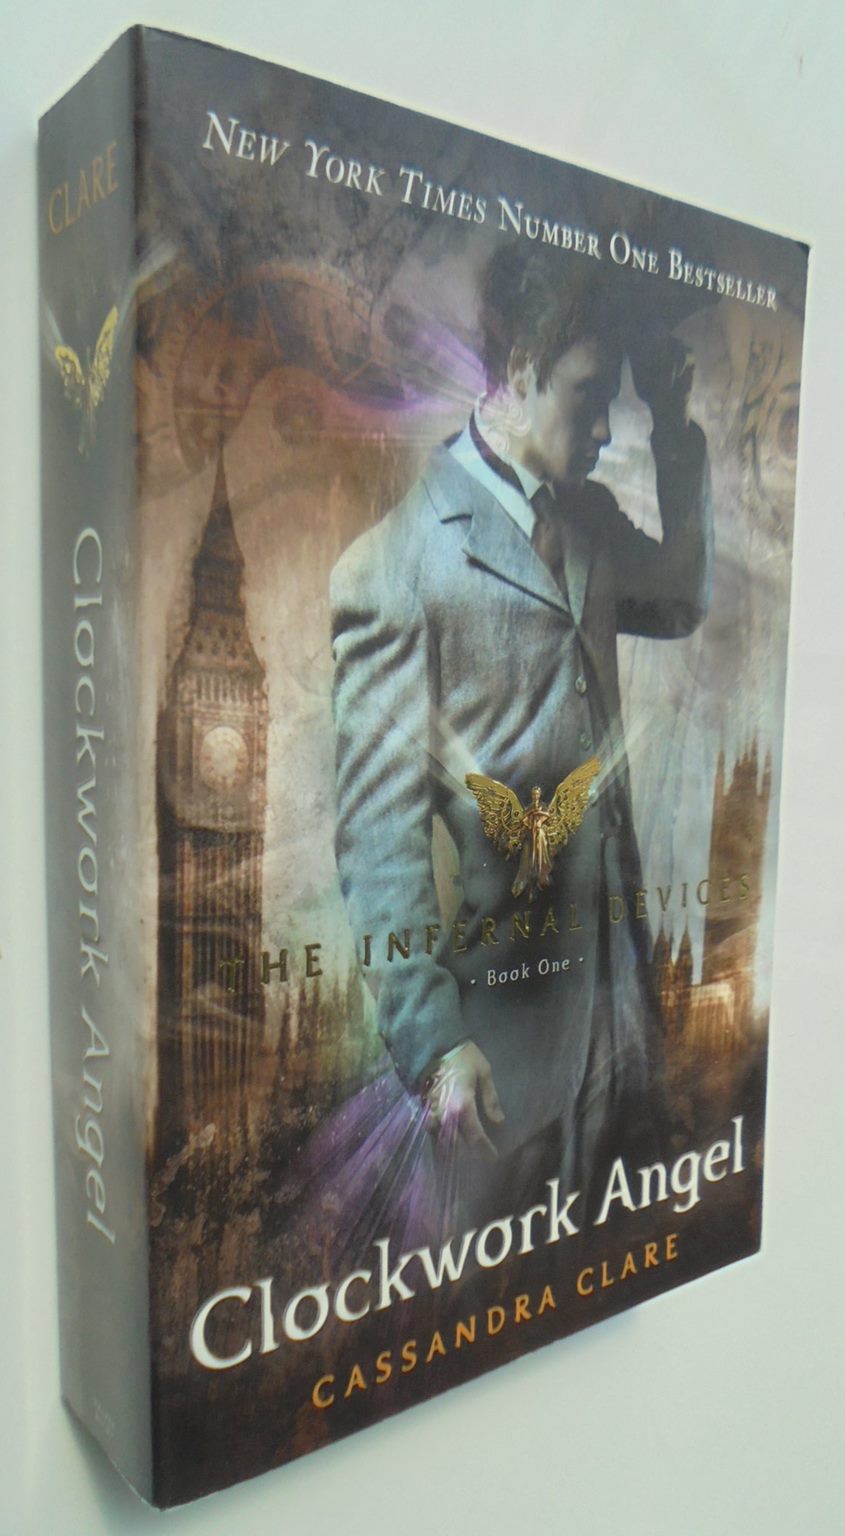 The Clockwork Angel. (The Infernal Devices) By Cassandra Clare